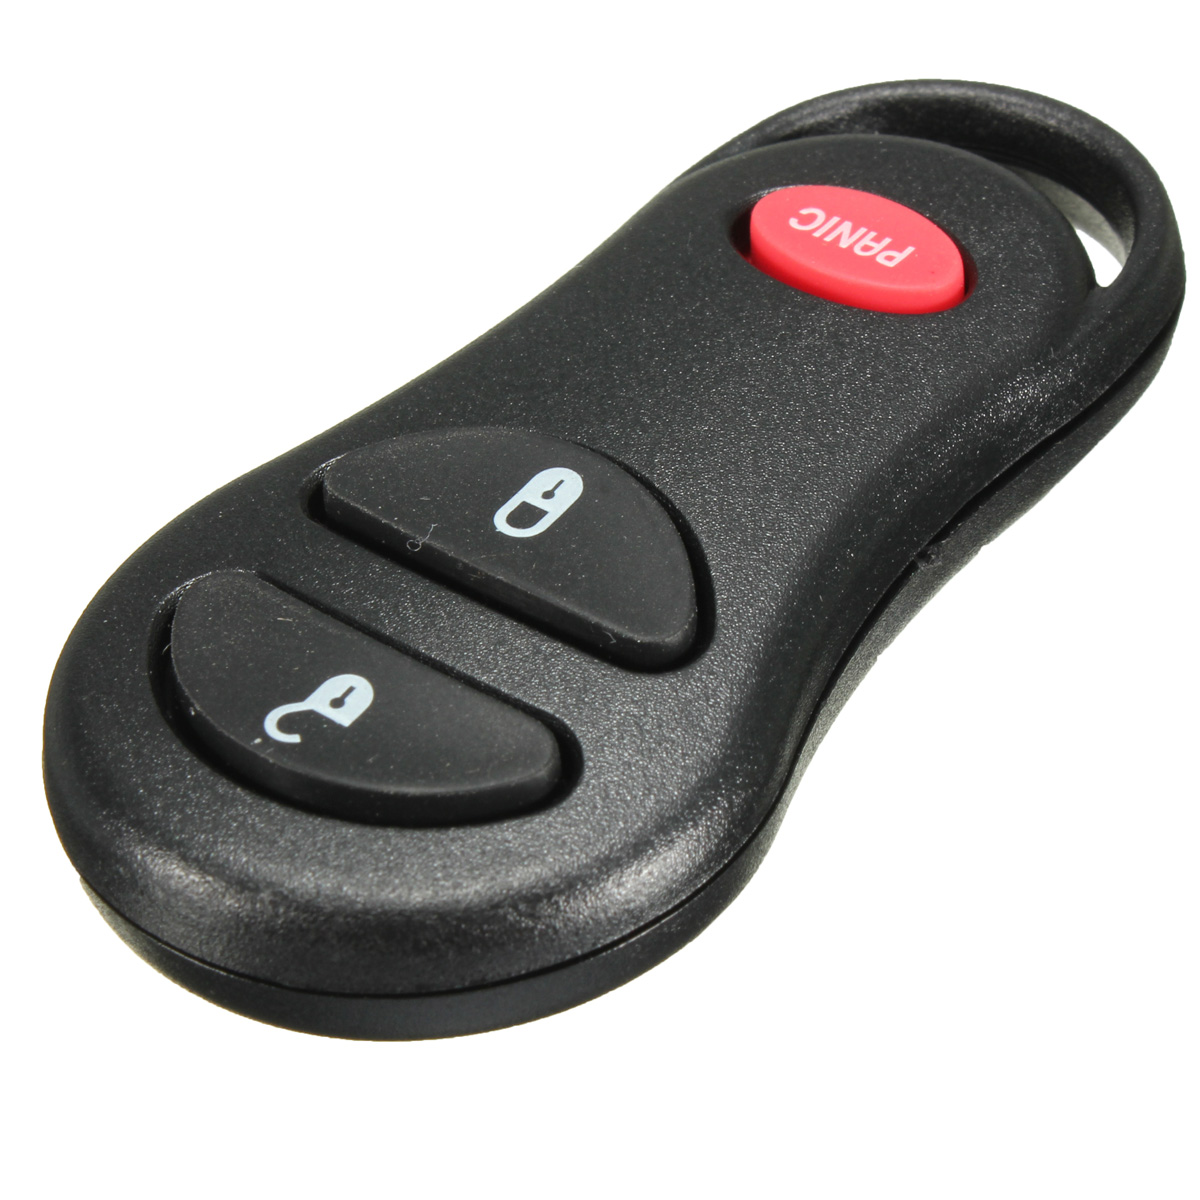 jeep grand cherokee key fob battery replacement